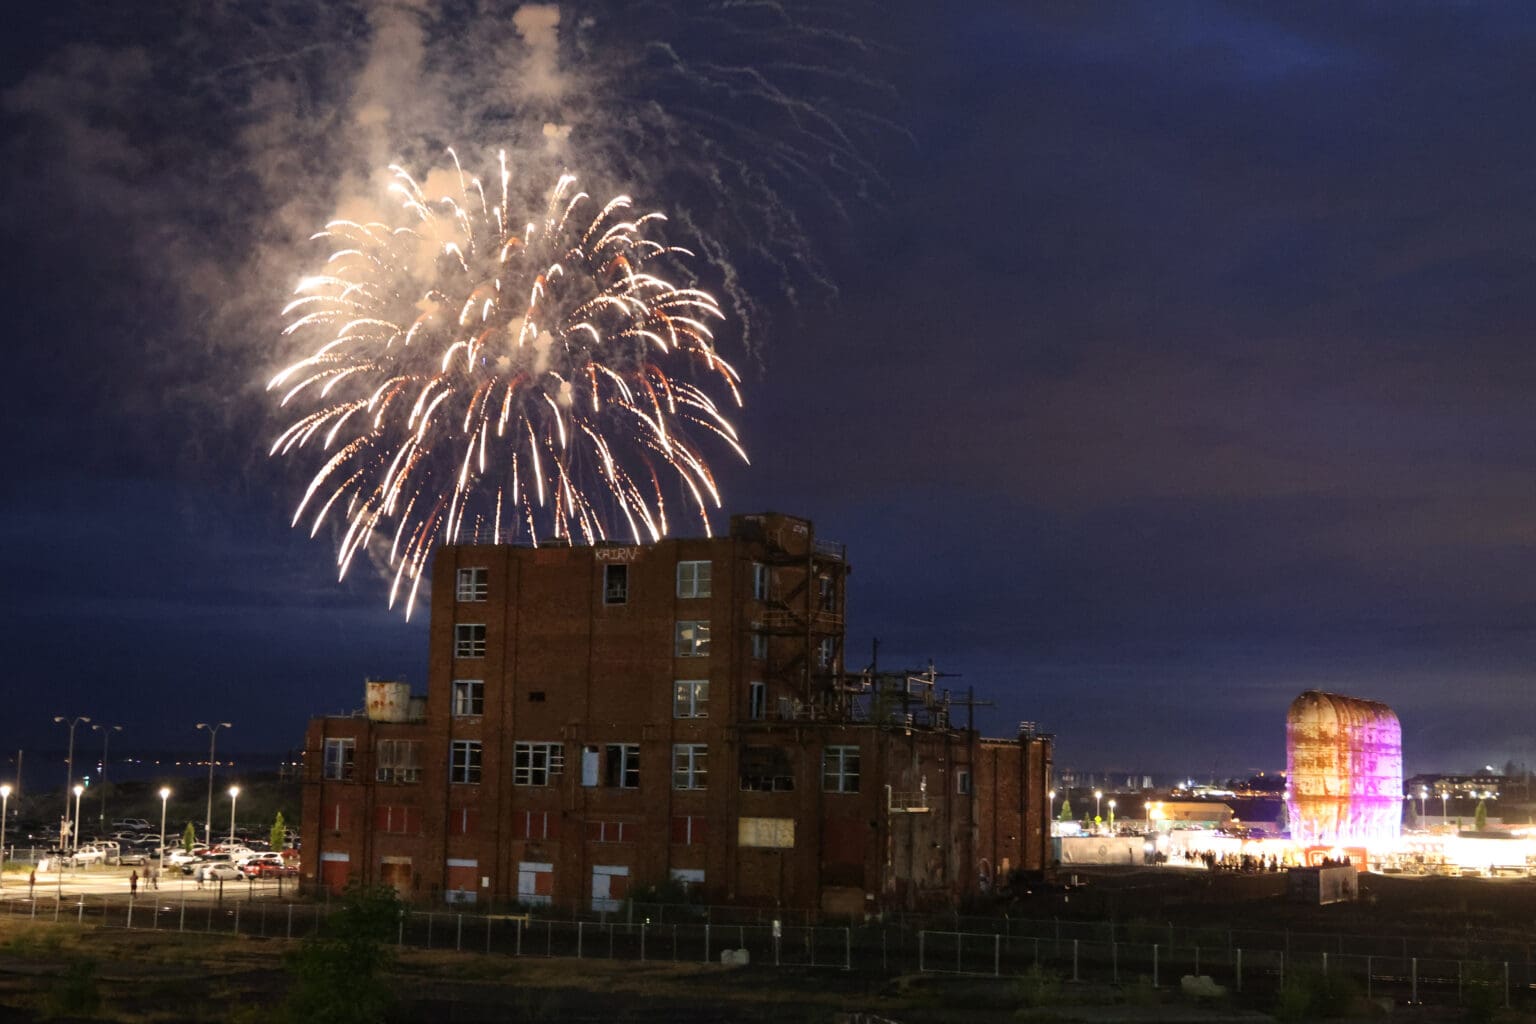 Fireworks explode behind the Georgia-Pacific Alcohol Plant building July 4